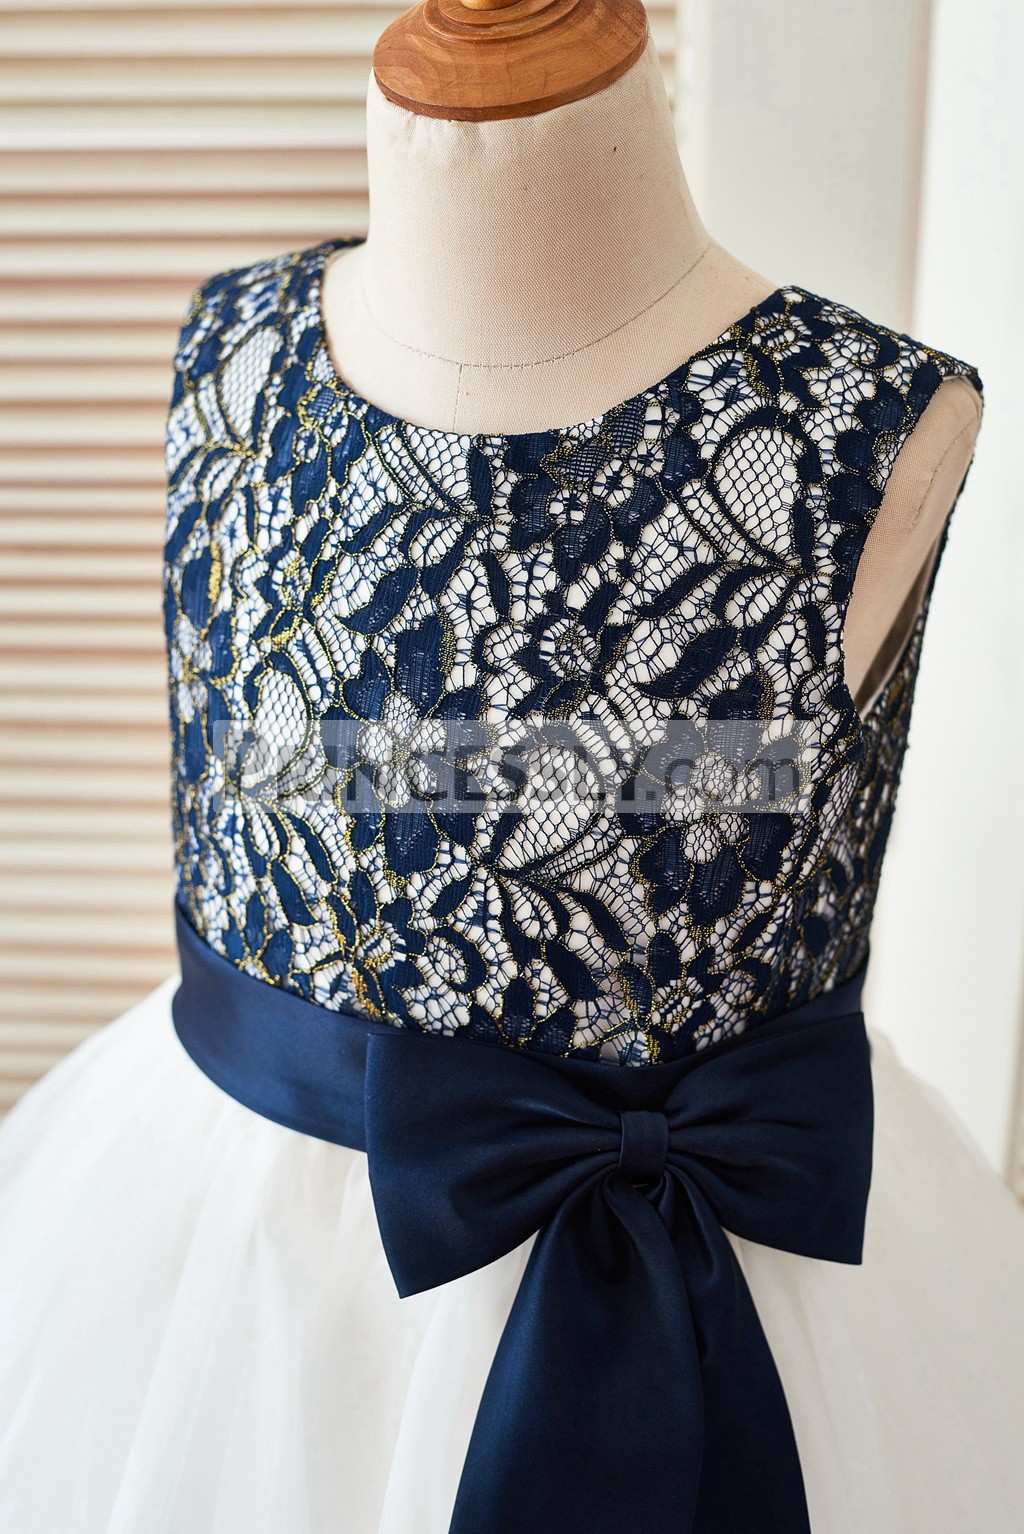 navy blue with gold dress